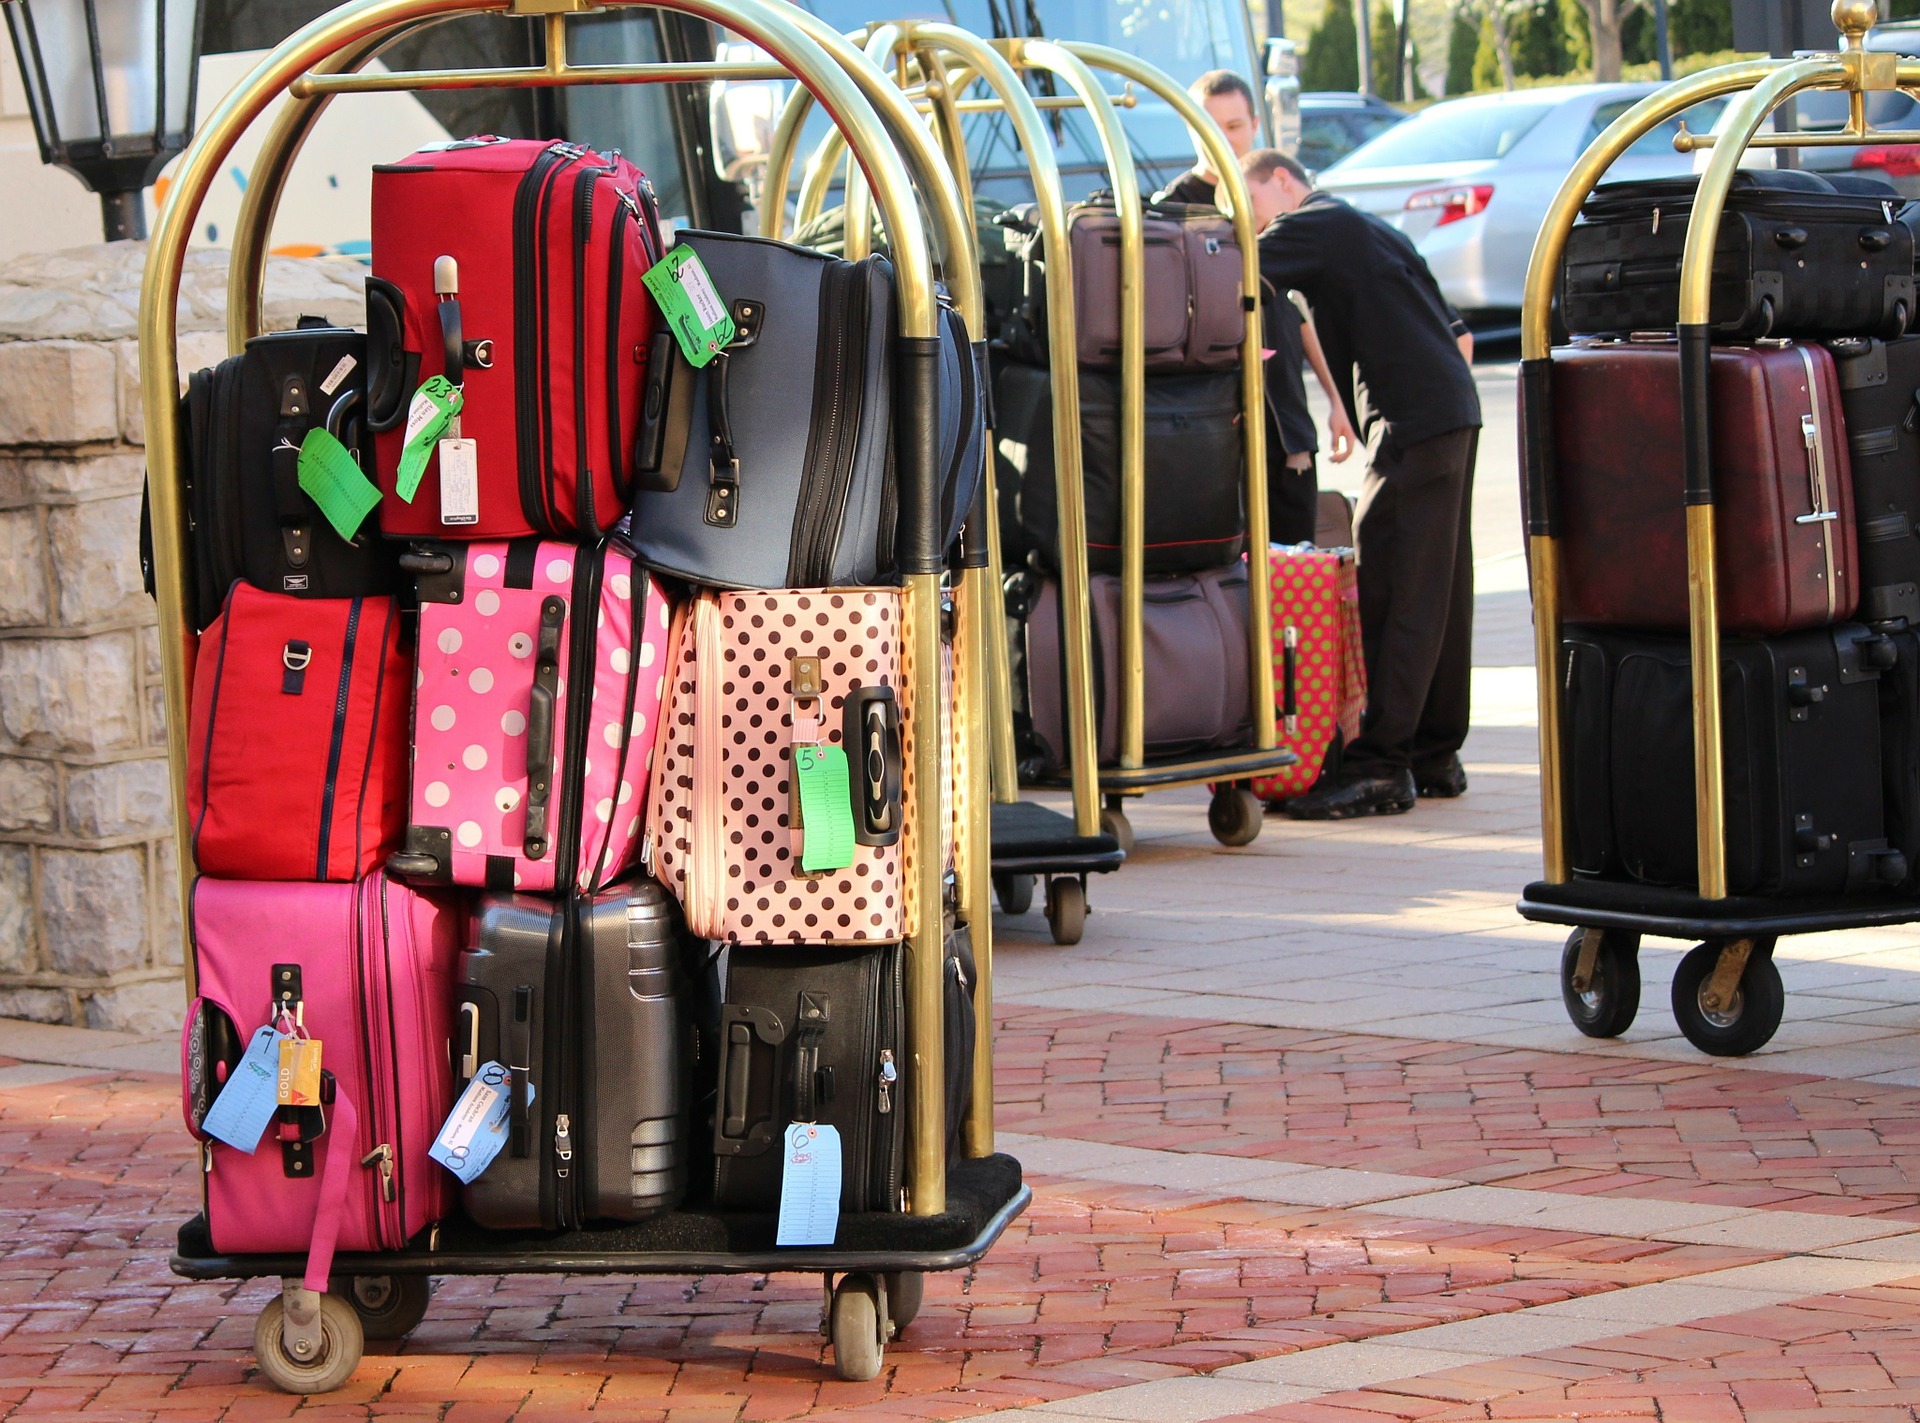 Image of luggage to be moved into corporate housing